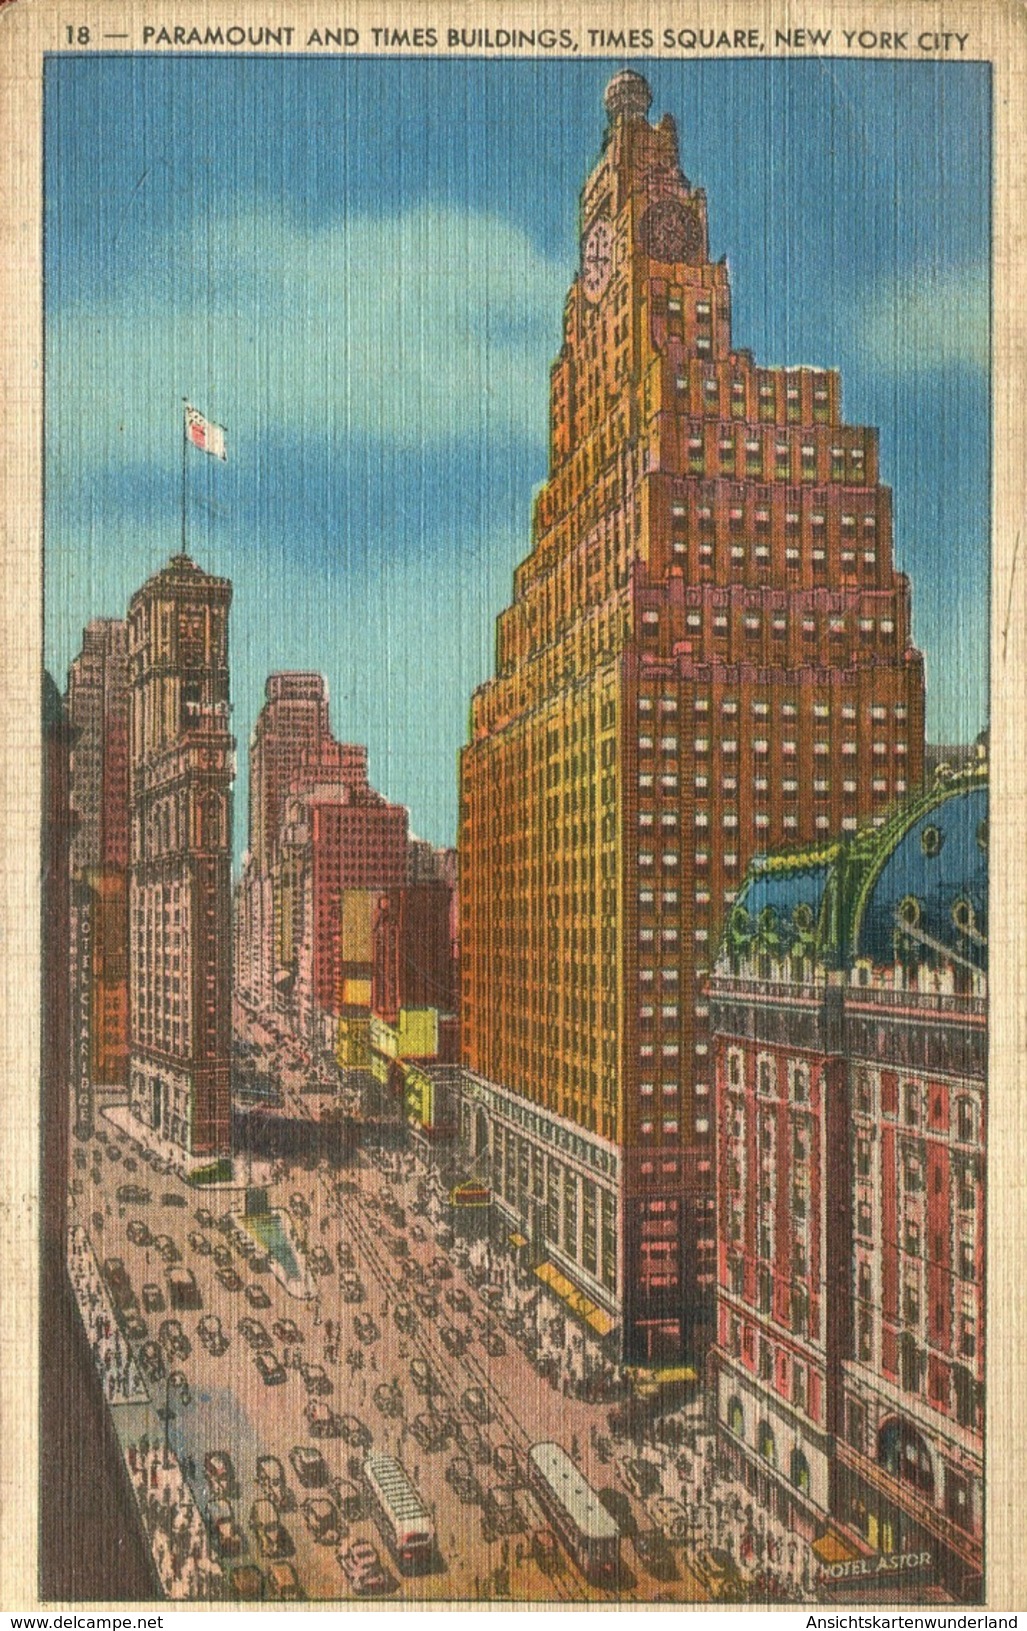 New York City - Paramount And Times Buildings, Times Square (000142) - Time Square